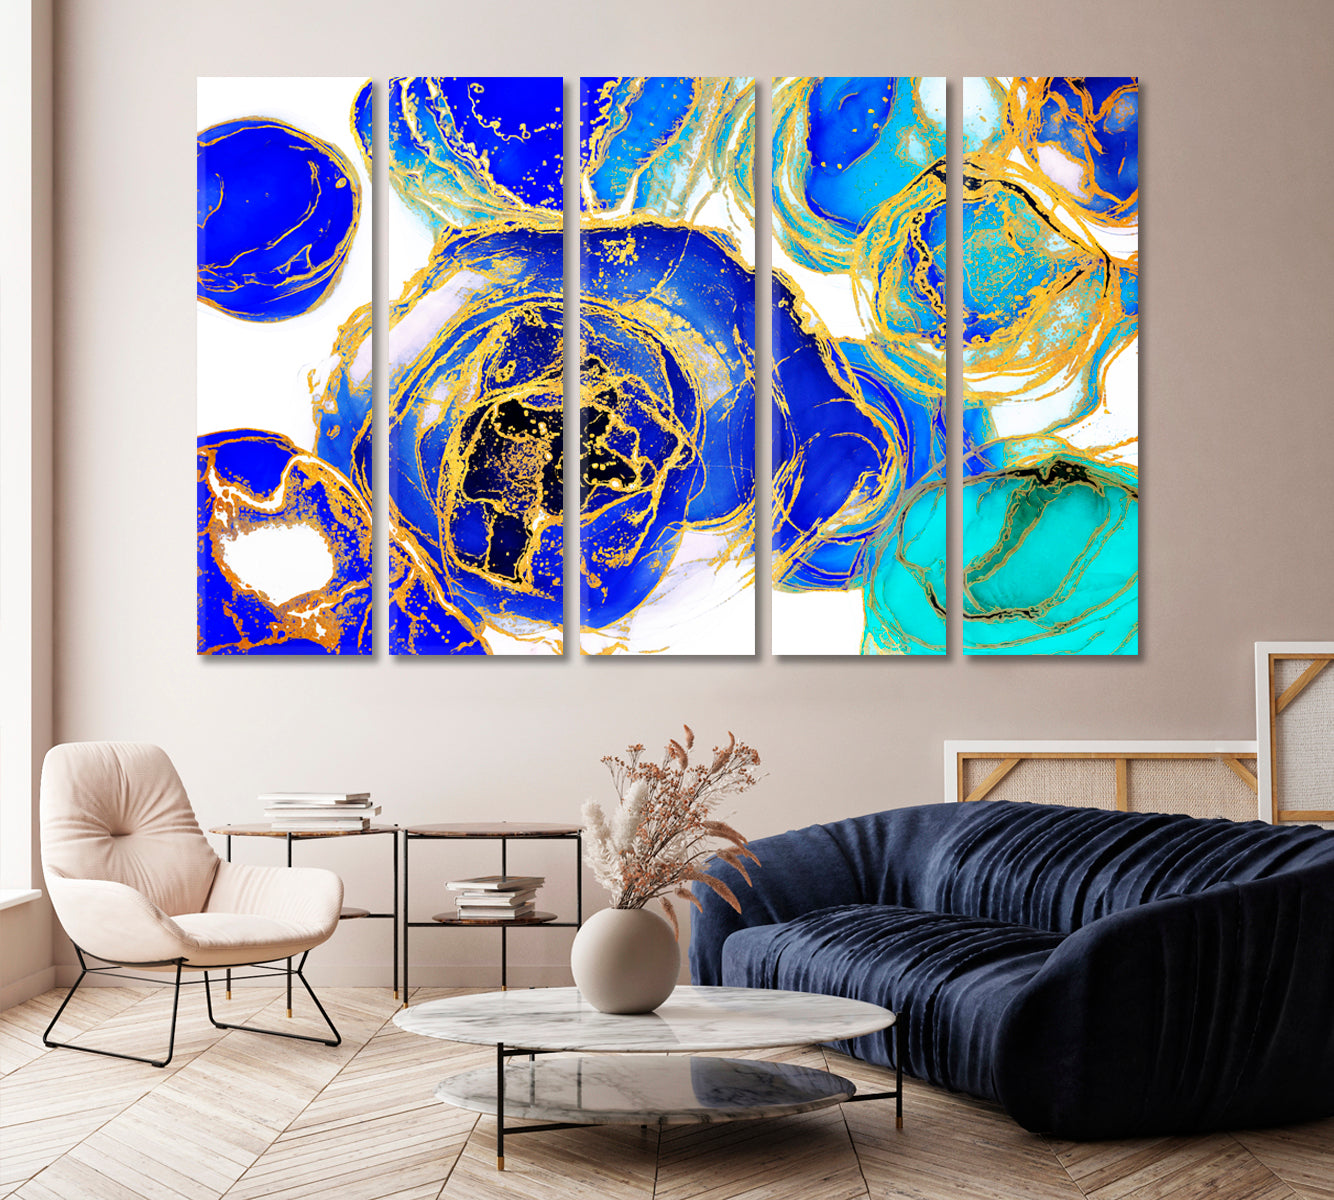 Abstract Alcohol Ink Blue and Gold Swirls Modern Art Canvas Print-Canvas Print-CetArt-1 Panel-24x16 inches-CetArt